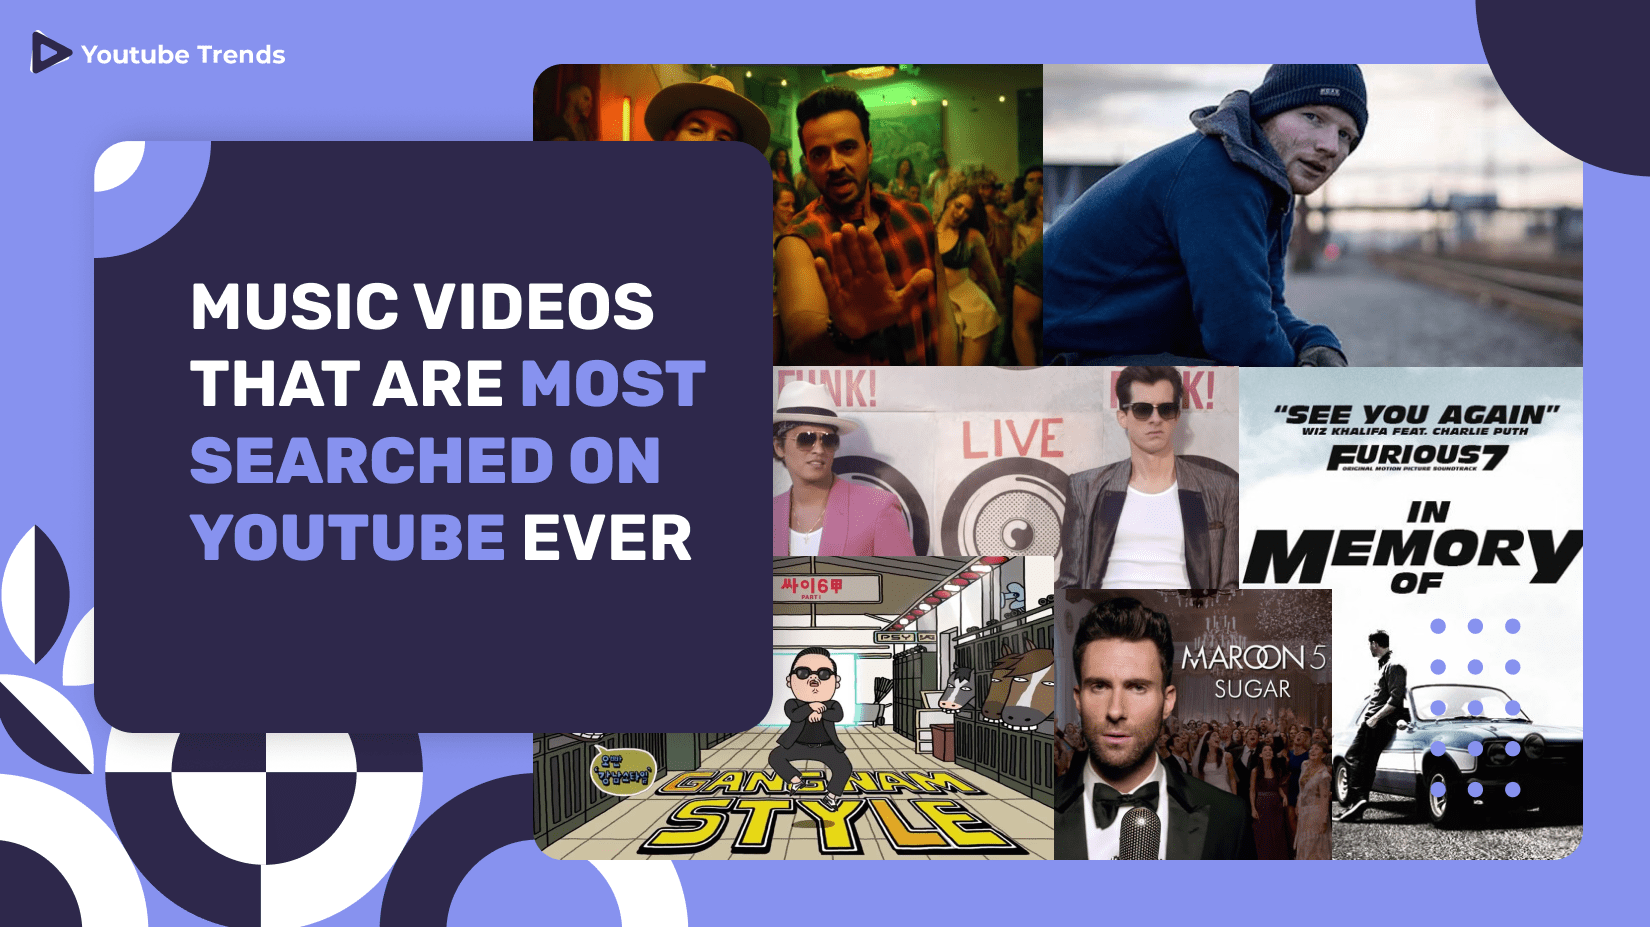 6 Music Videos That Are Most Searched on YouTube Ever